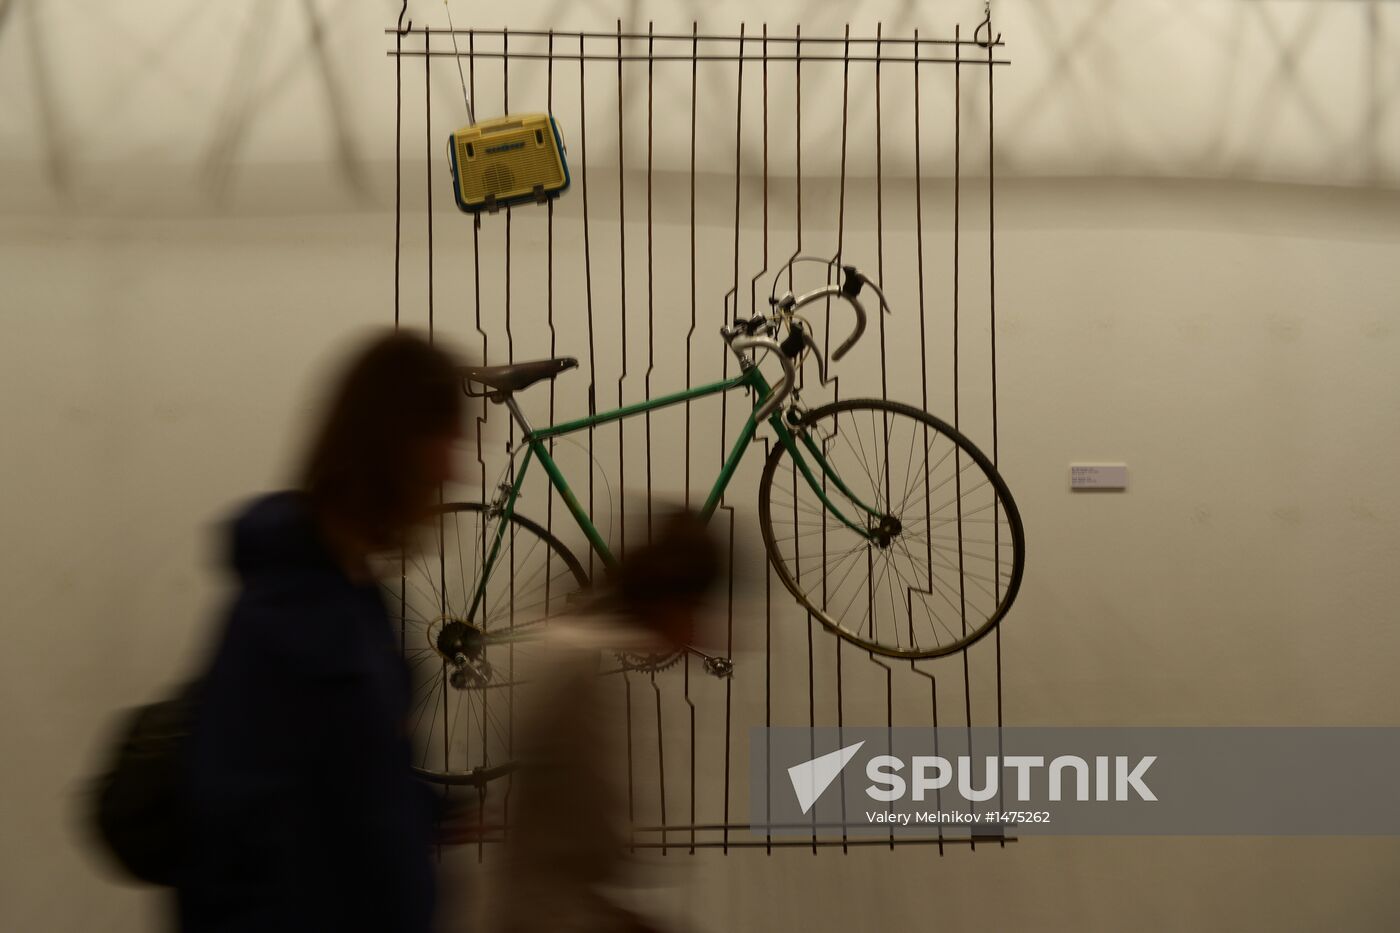 Dmitry Gutov's exhibition "Nothing To Be Surprised About"